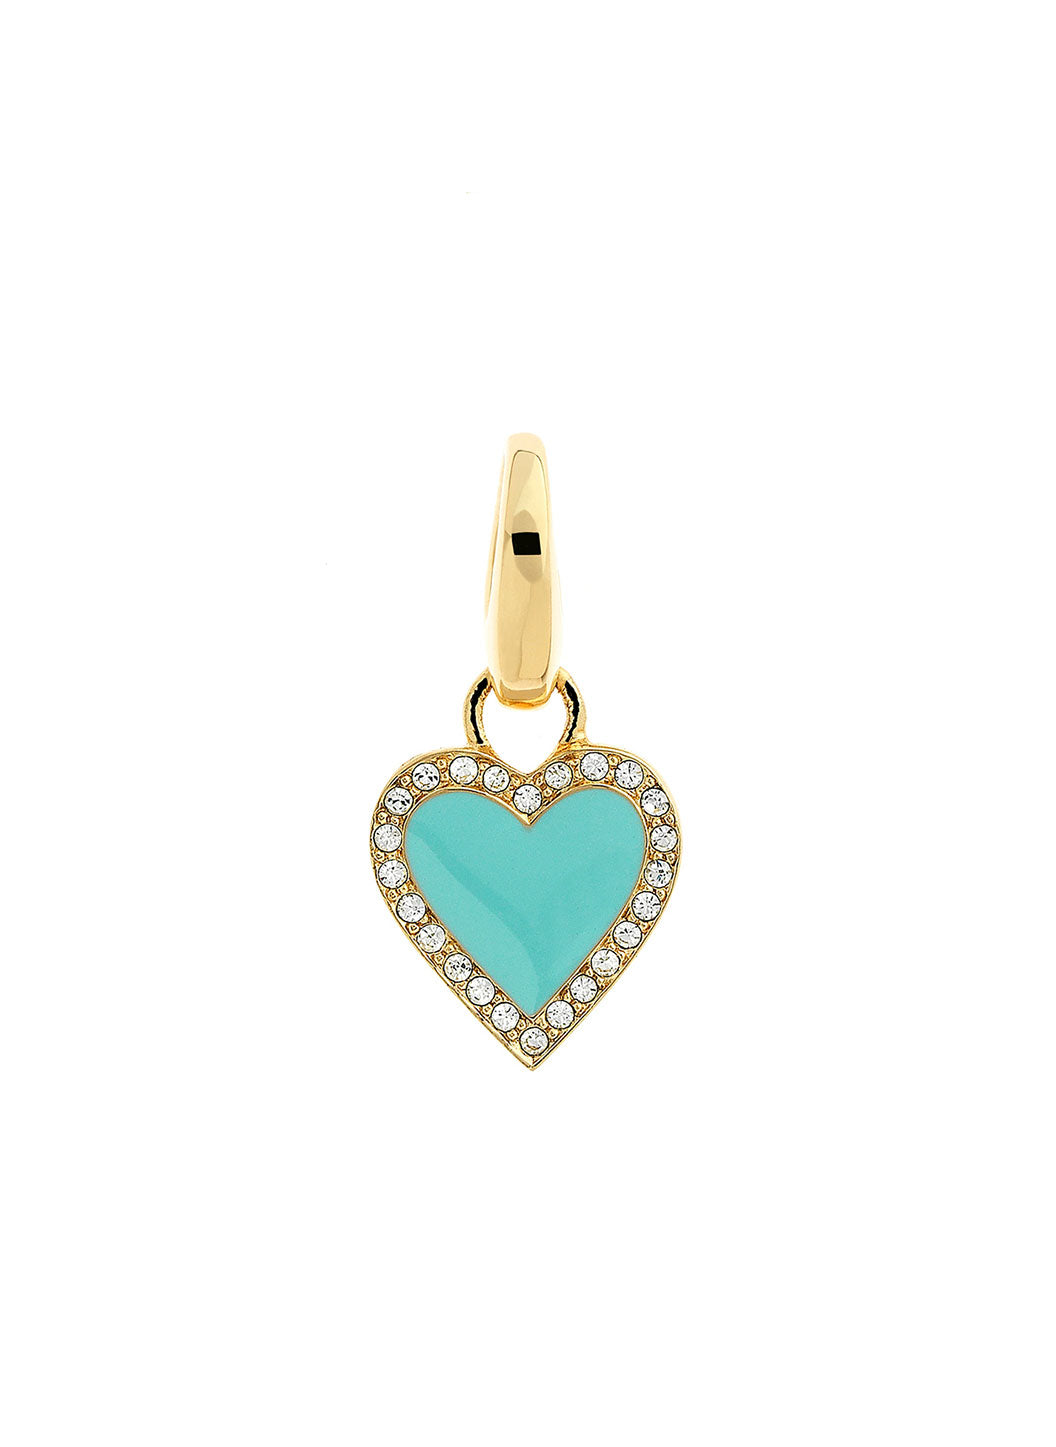 Gold Turquoise Heart Charm